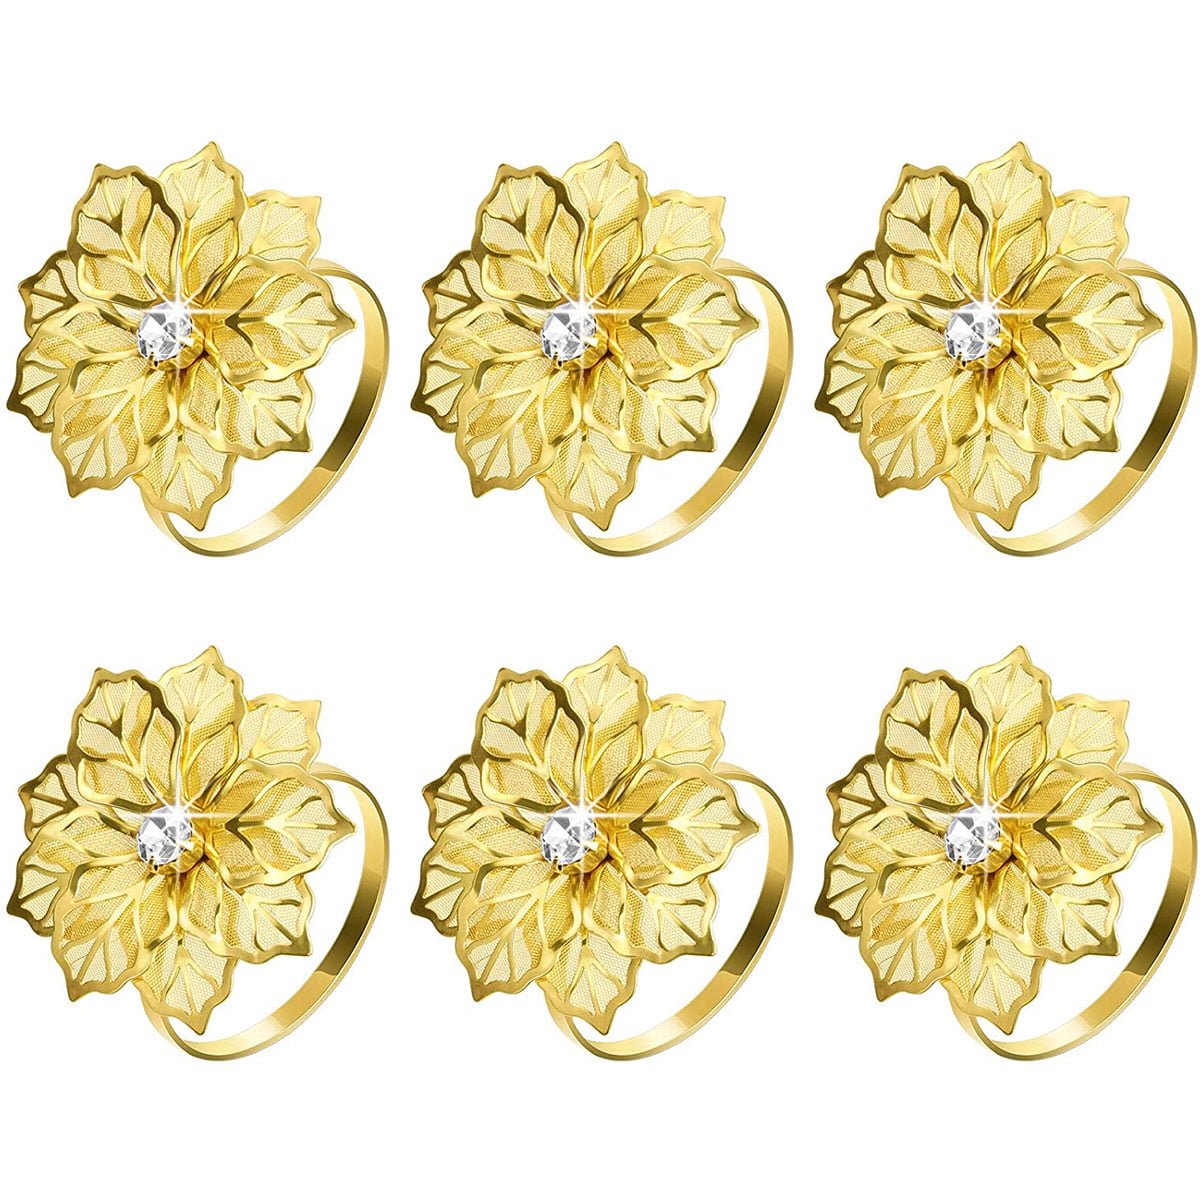 Nagu Flower Napkin Rings Set of 6, Hollow Out Floral Napkin Holder Adornment Exquisite Household Napkins Rings Set Rhinestone Napkin Rings for